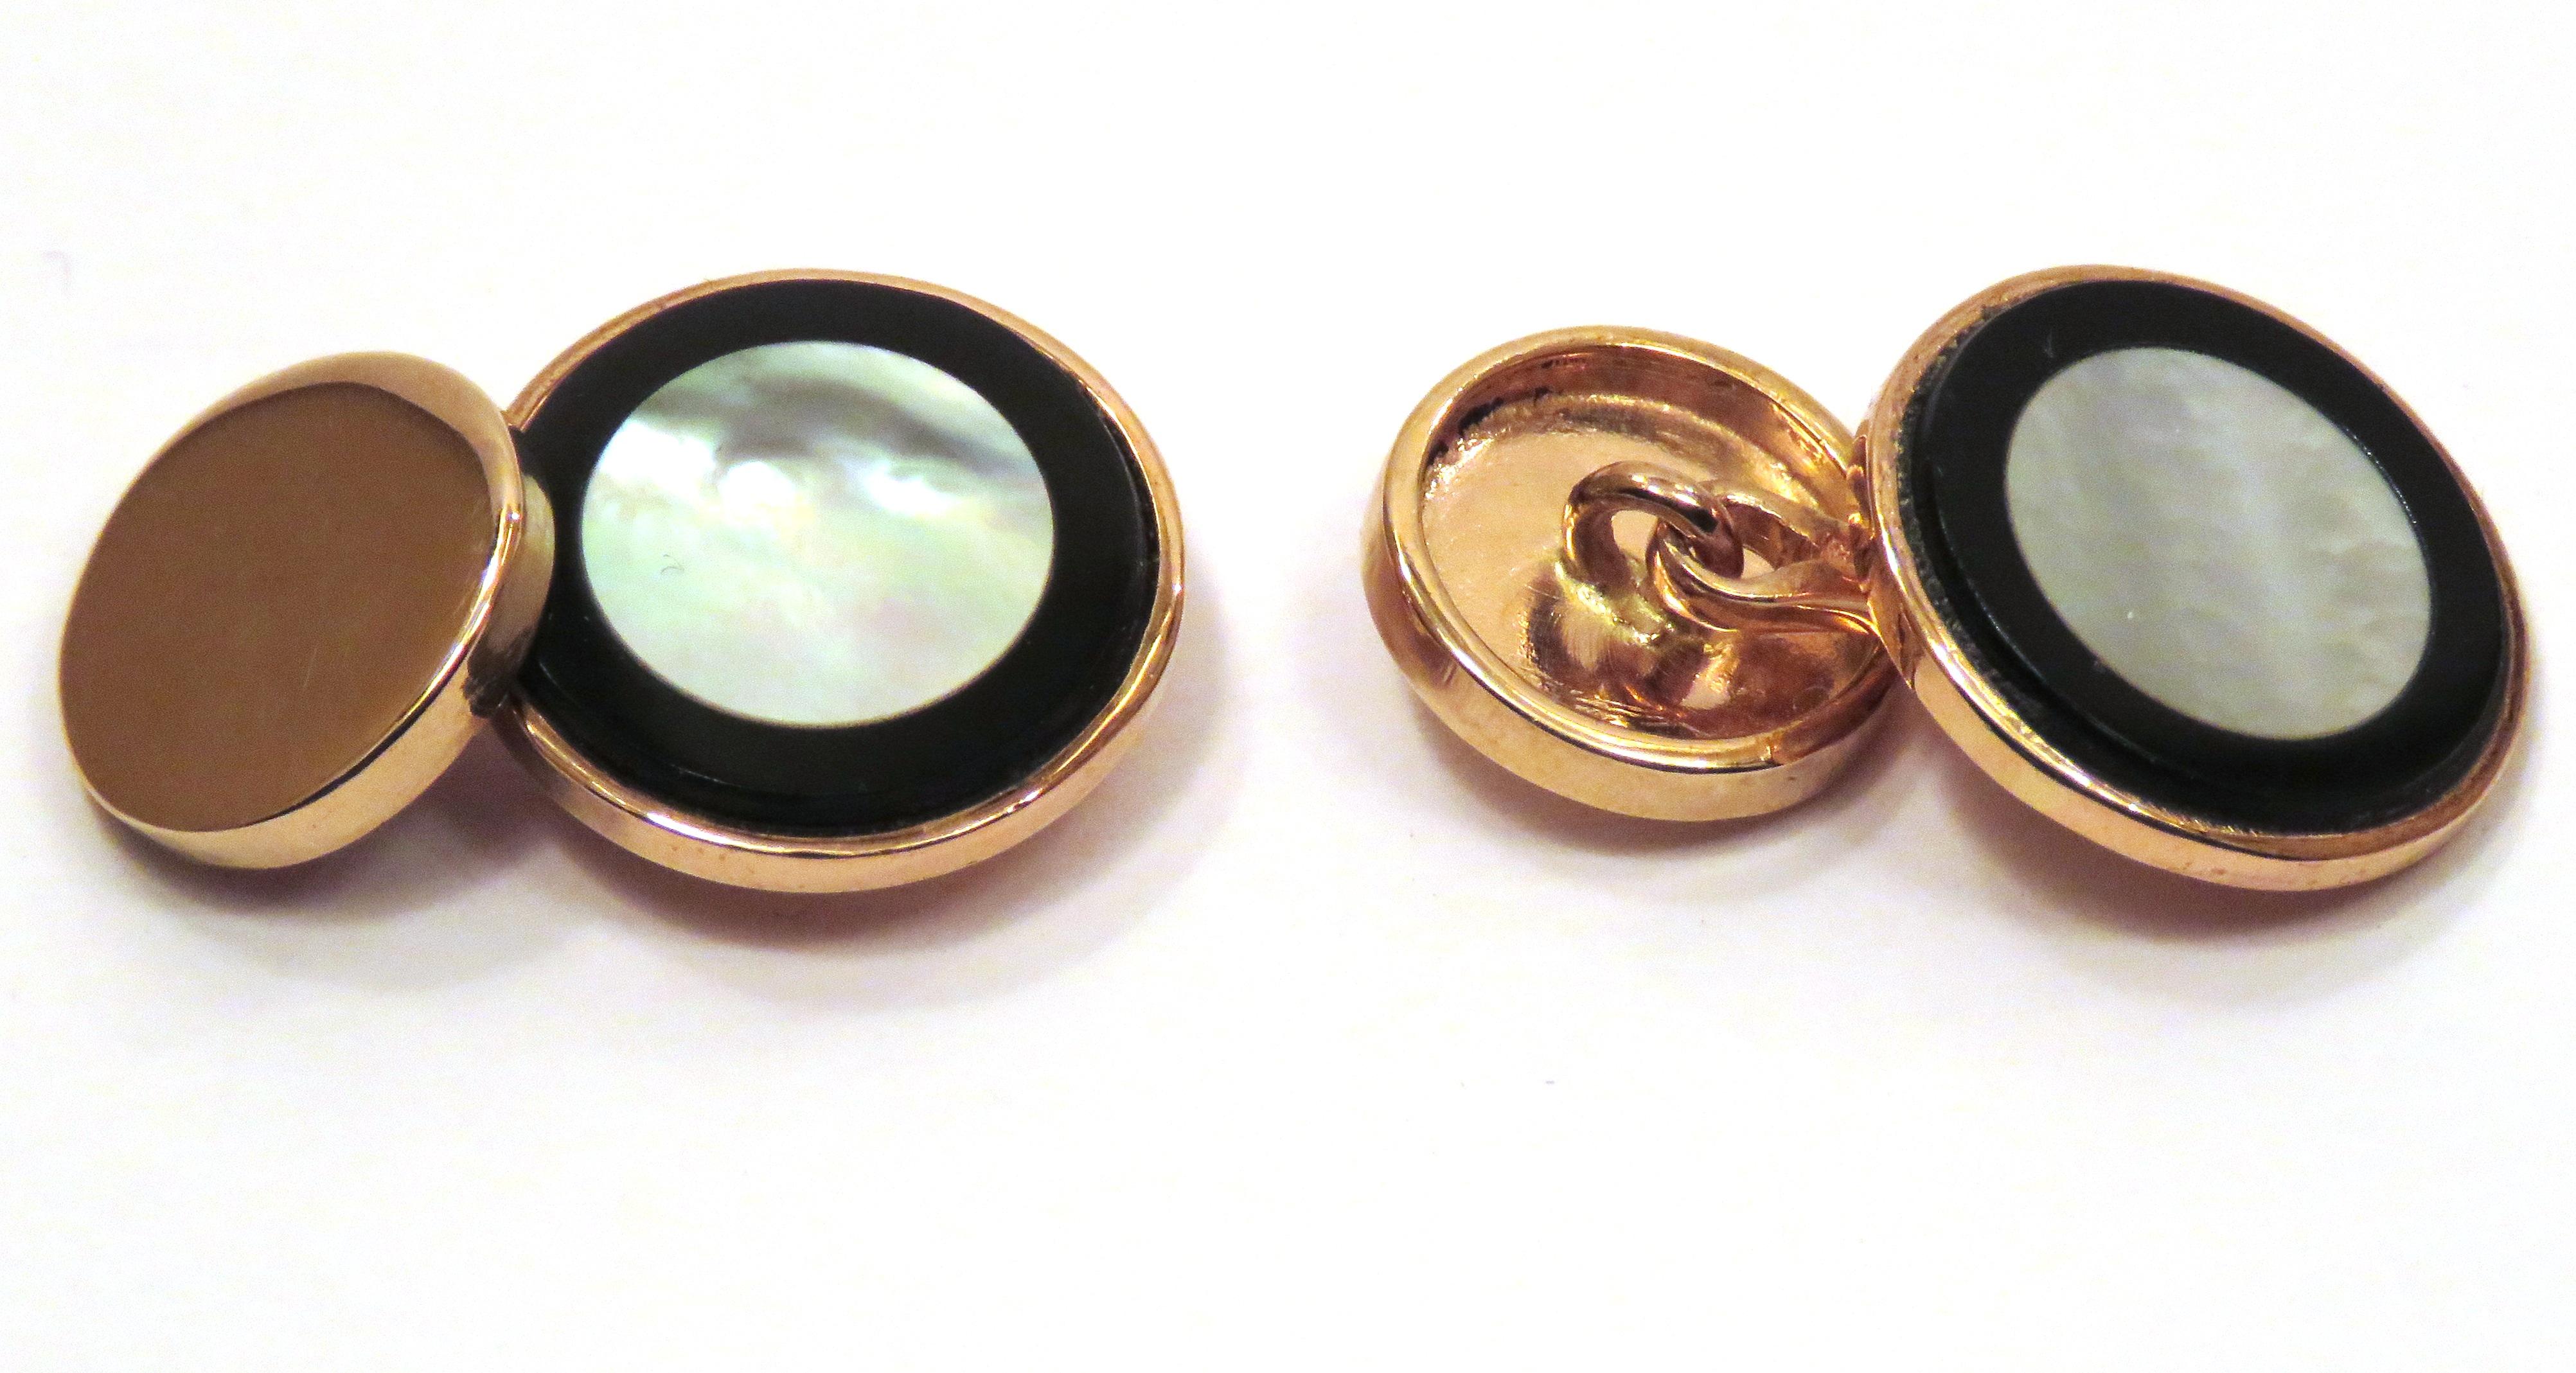 A chic pair of circular shaped cufflinks in mother-of-pearl and onyx, mounted on 9 karat rose gold. Handcrafted in Italy by Botta Gioielli. The diameter of the bigger circle is 16 mm / 0,629 inches, the smaller circle is 12 mm / 0,472 inches. It  is